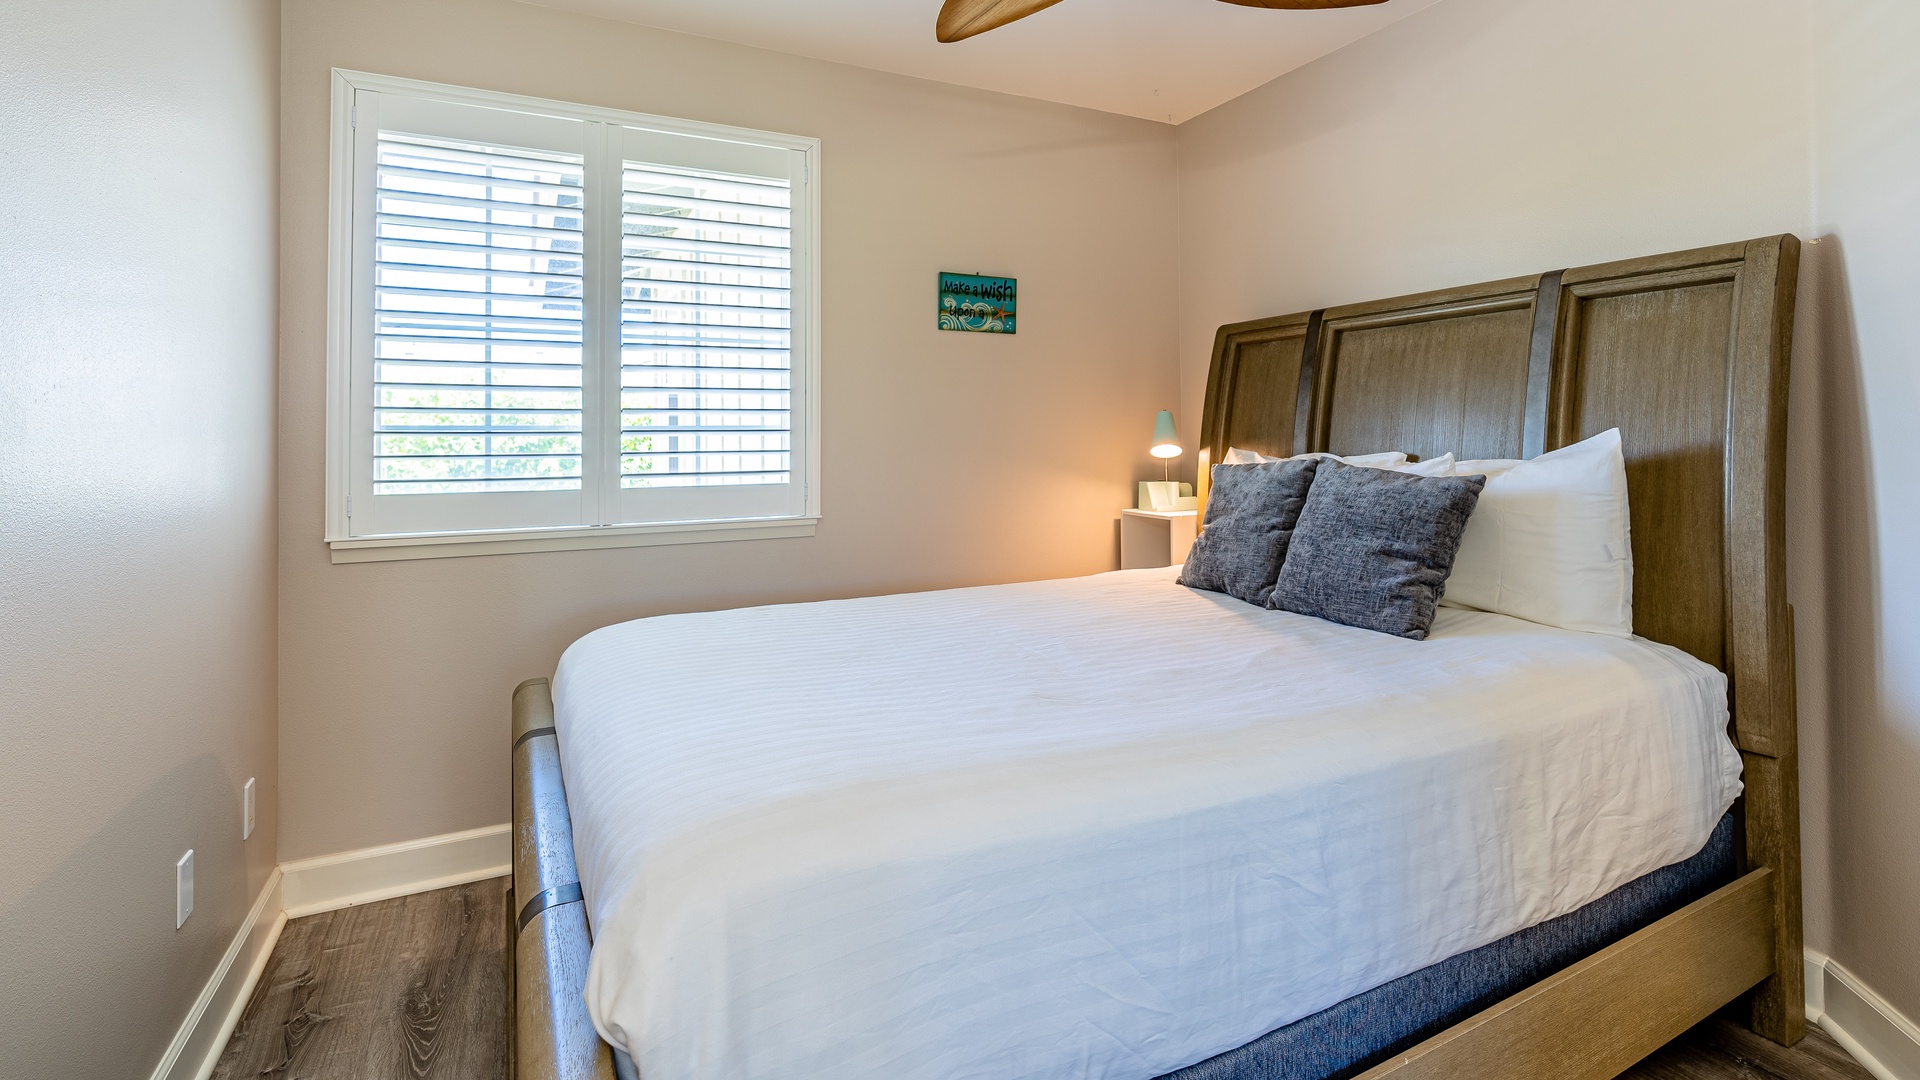 Kapolei Vacation Rentals, Hillside Villas 1508-2 - The second guest bedroom with a comfortable setting for a restful stay.